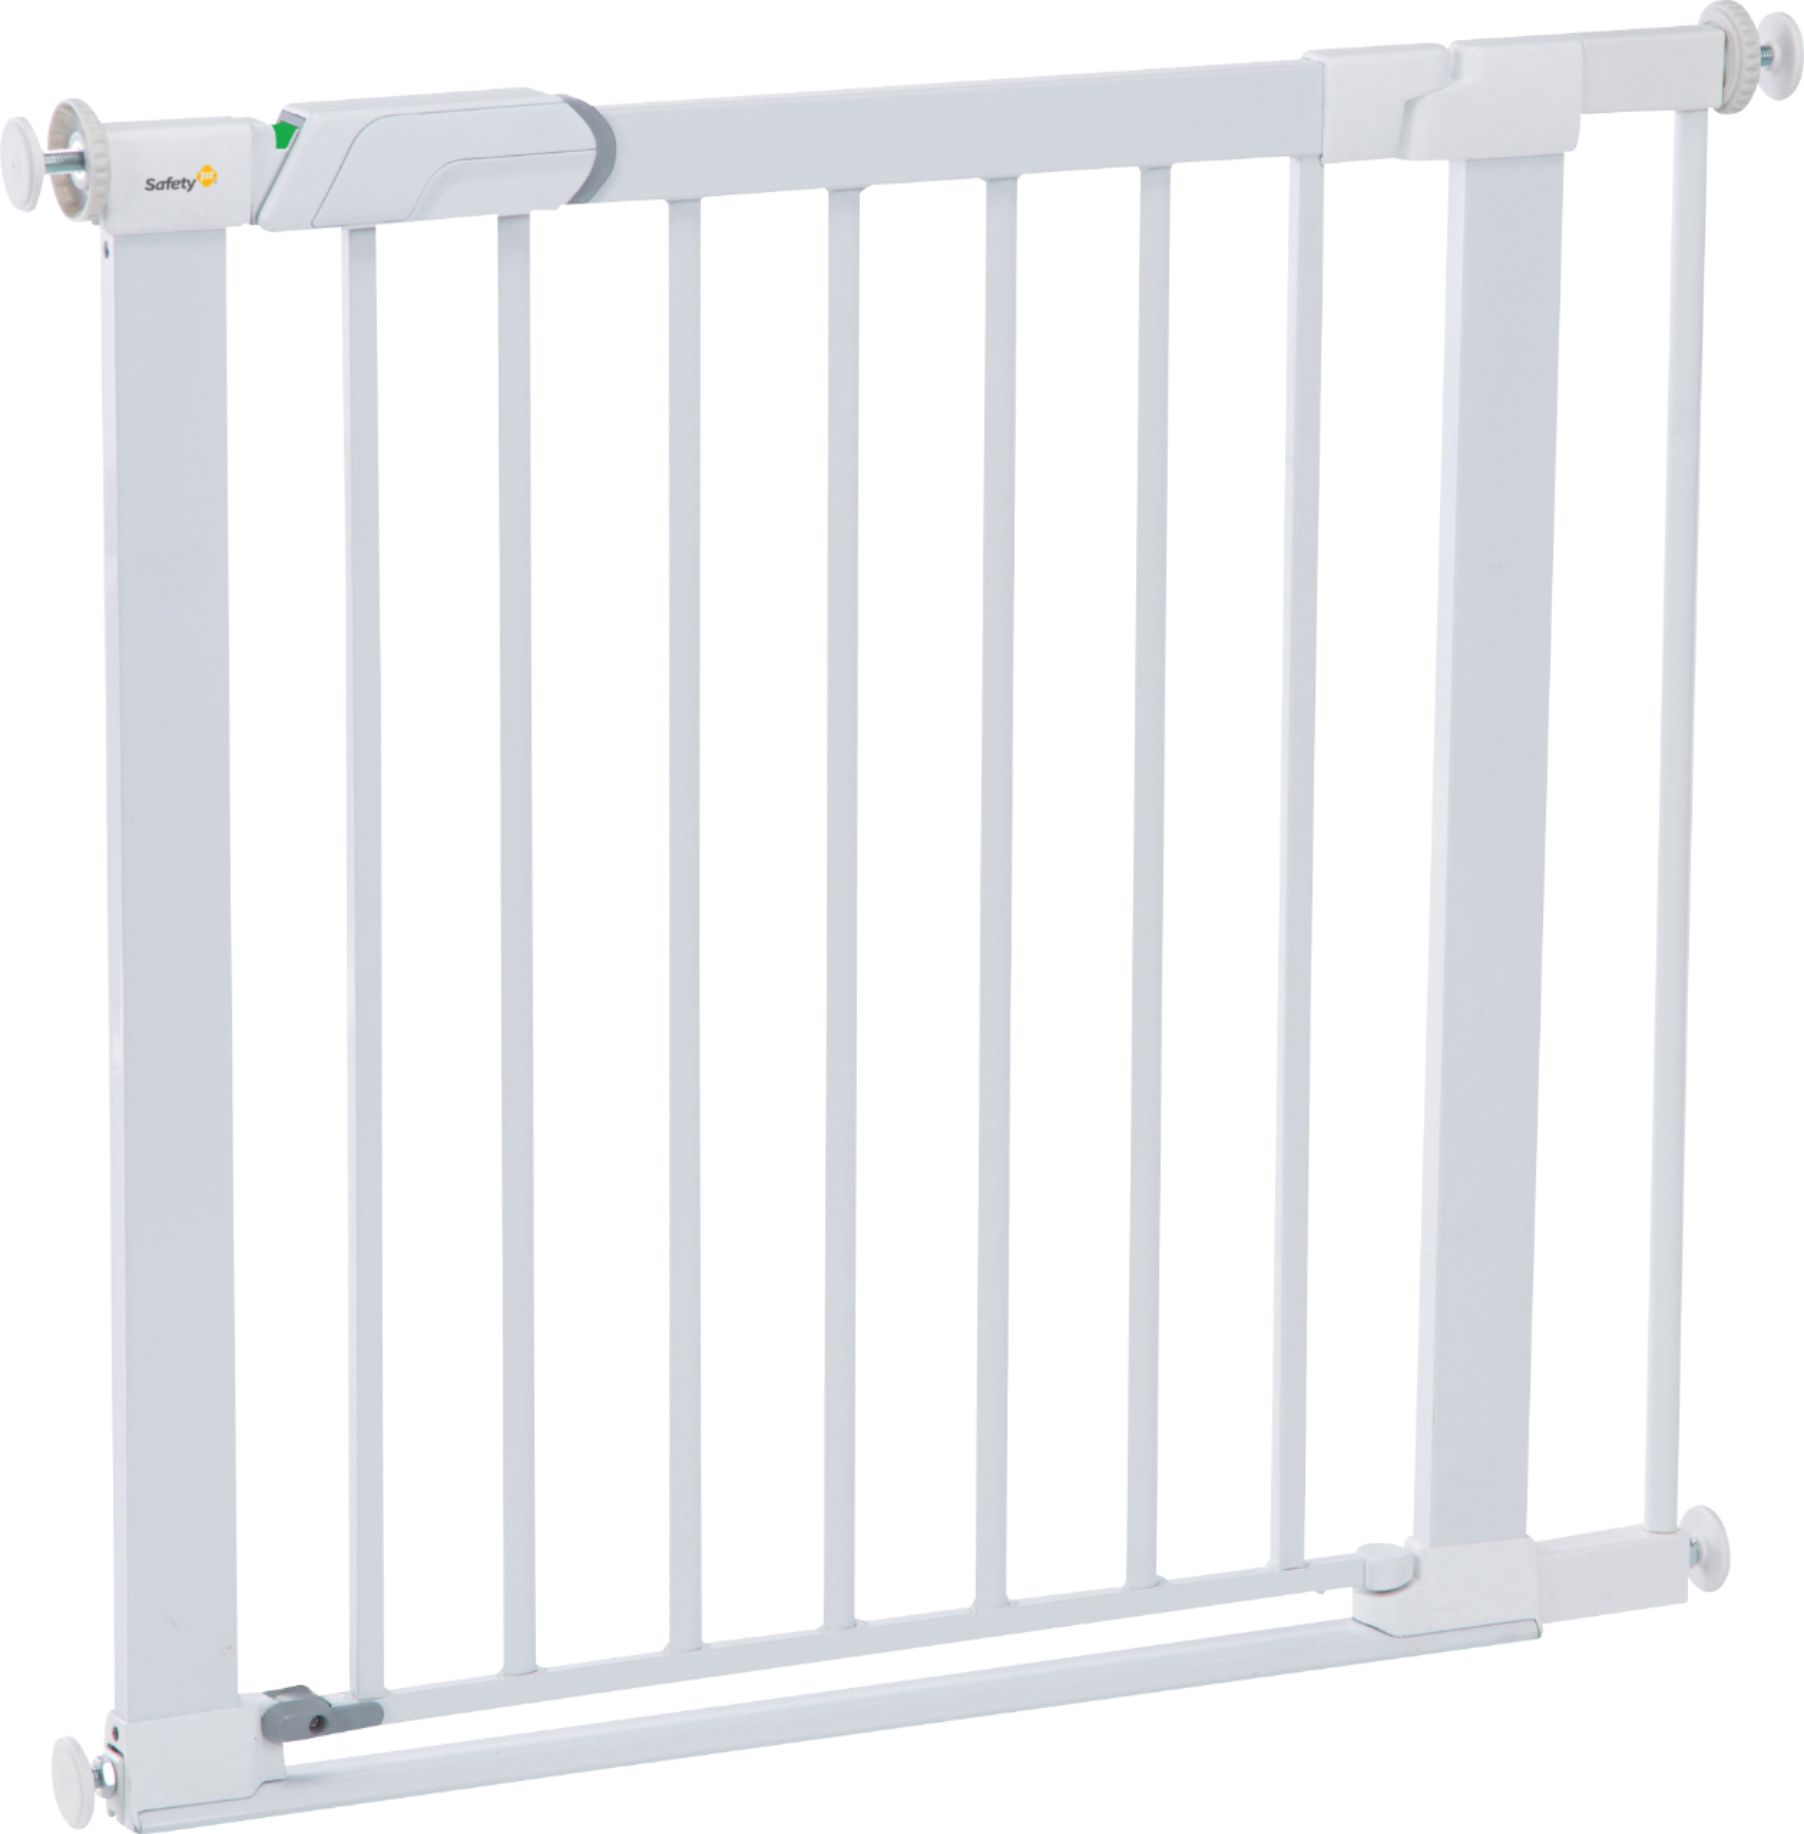 Angle View: Safety 1st - Flat Step Gate - White